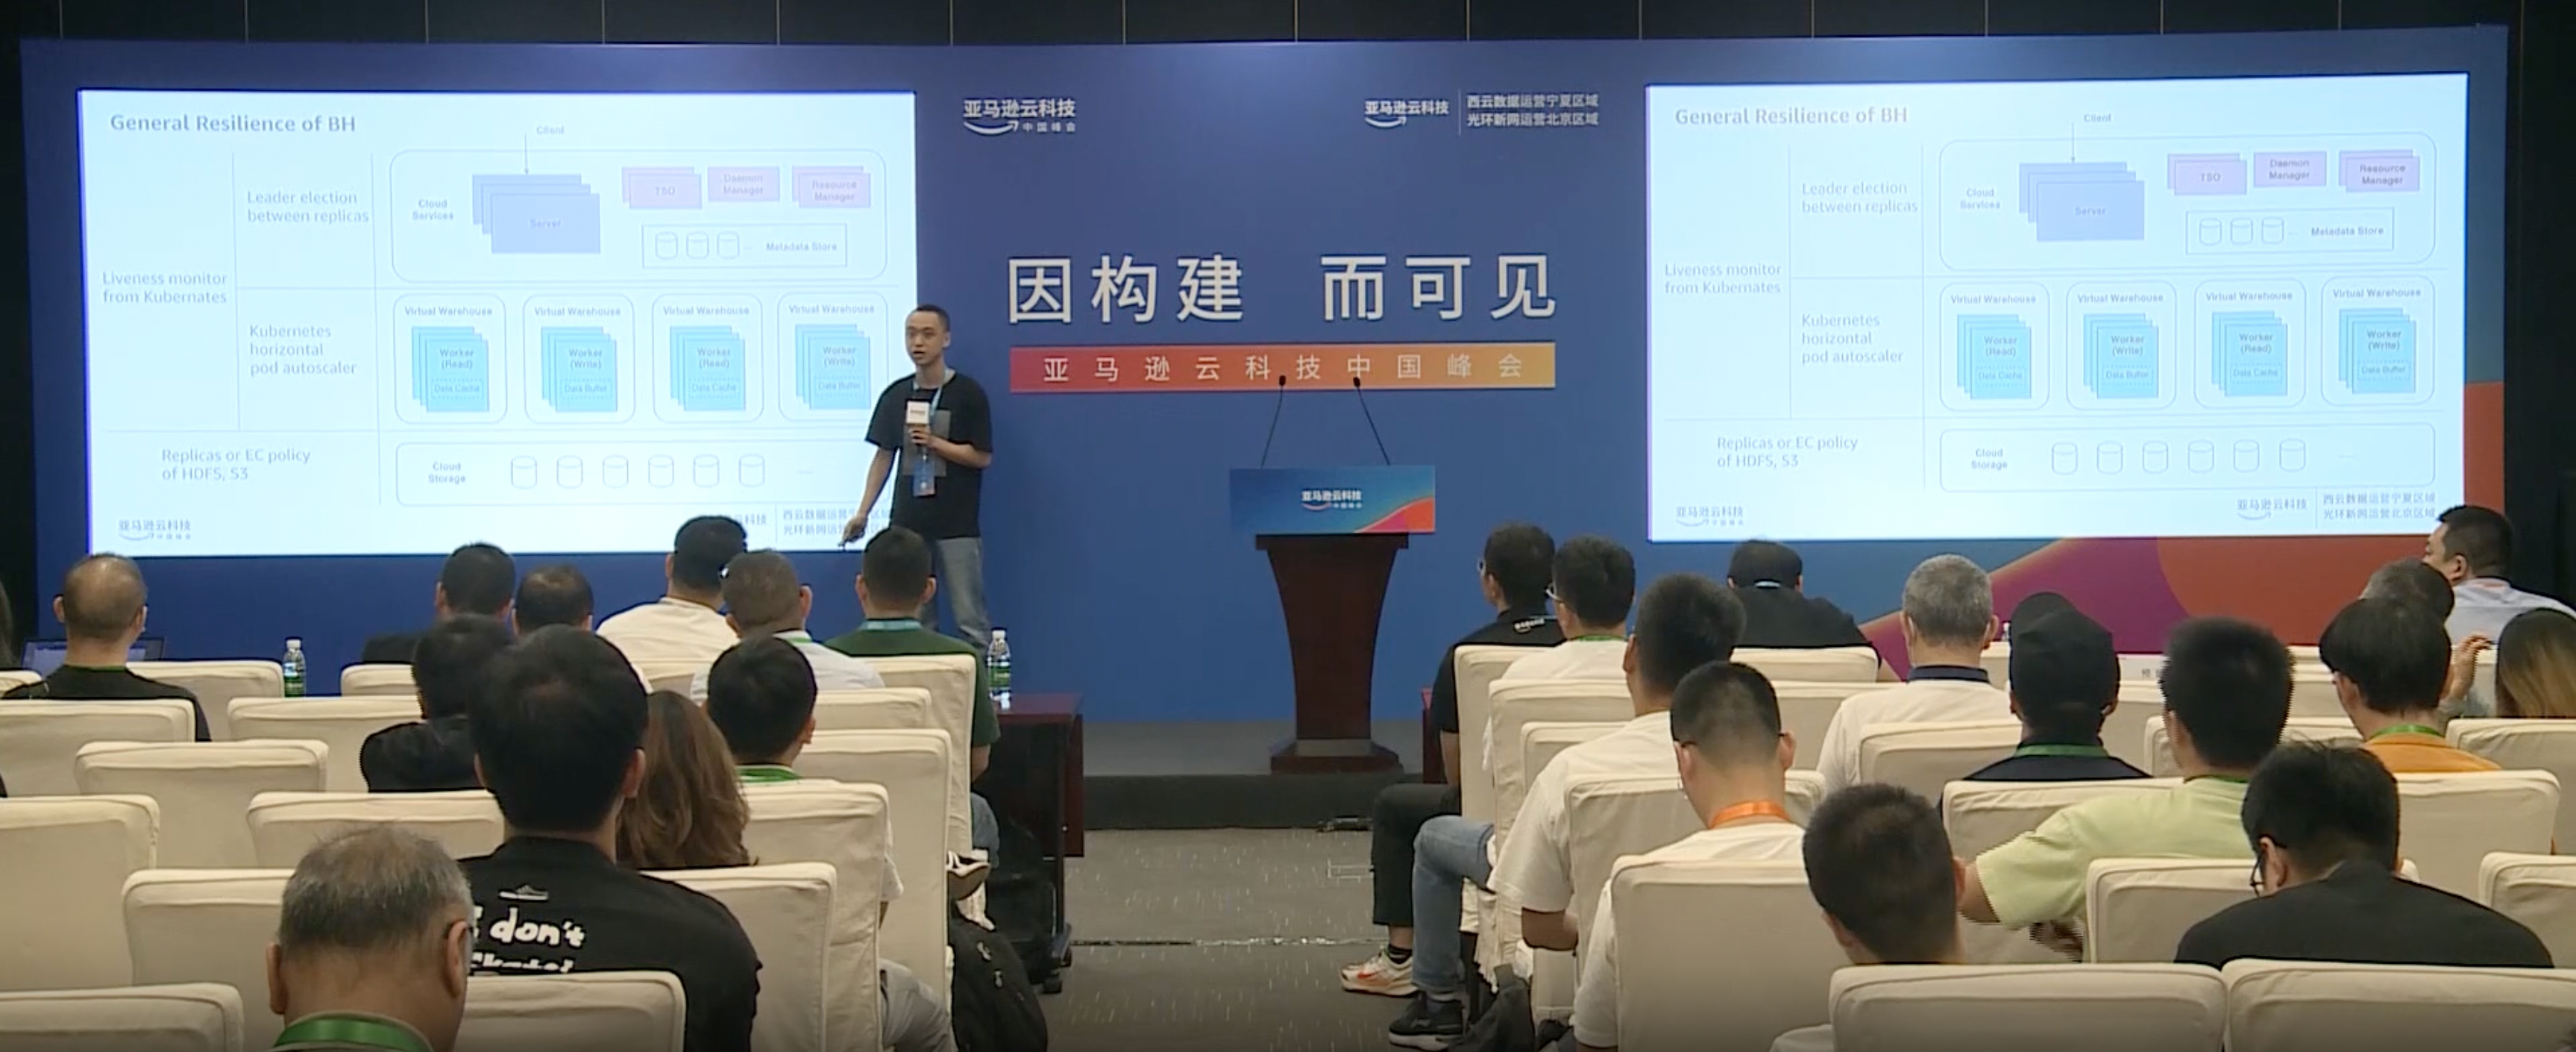 A Chinese man speaking with a presentation playing behind